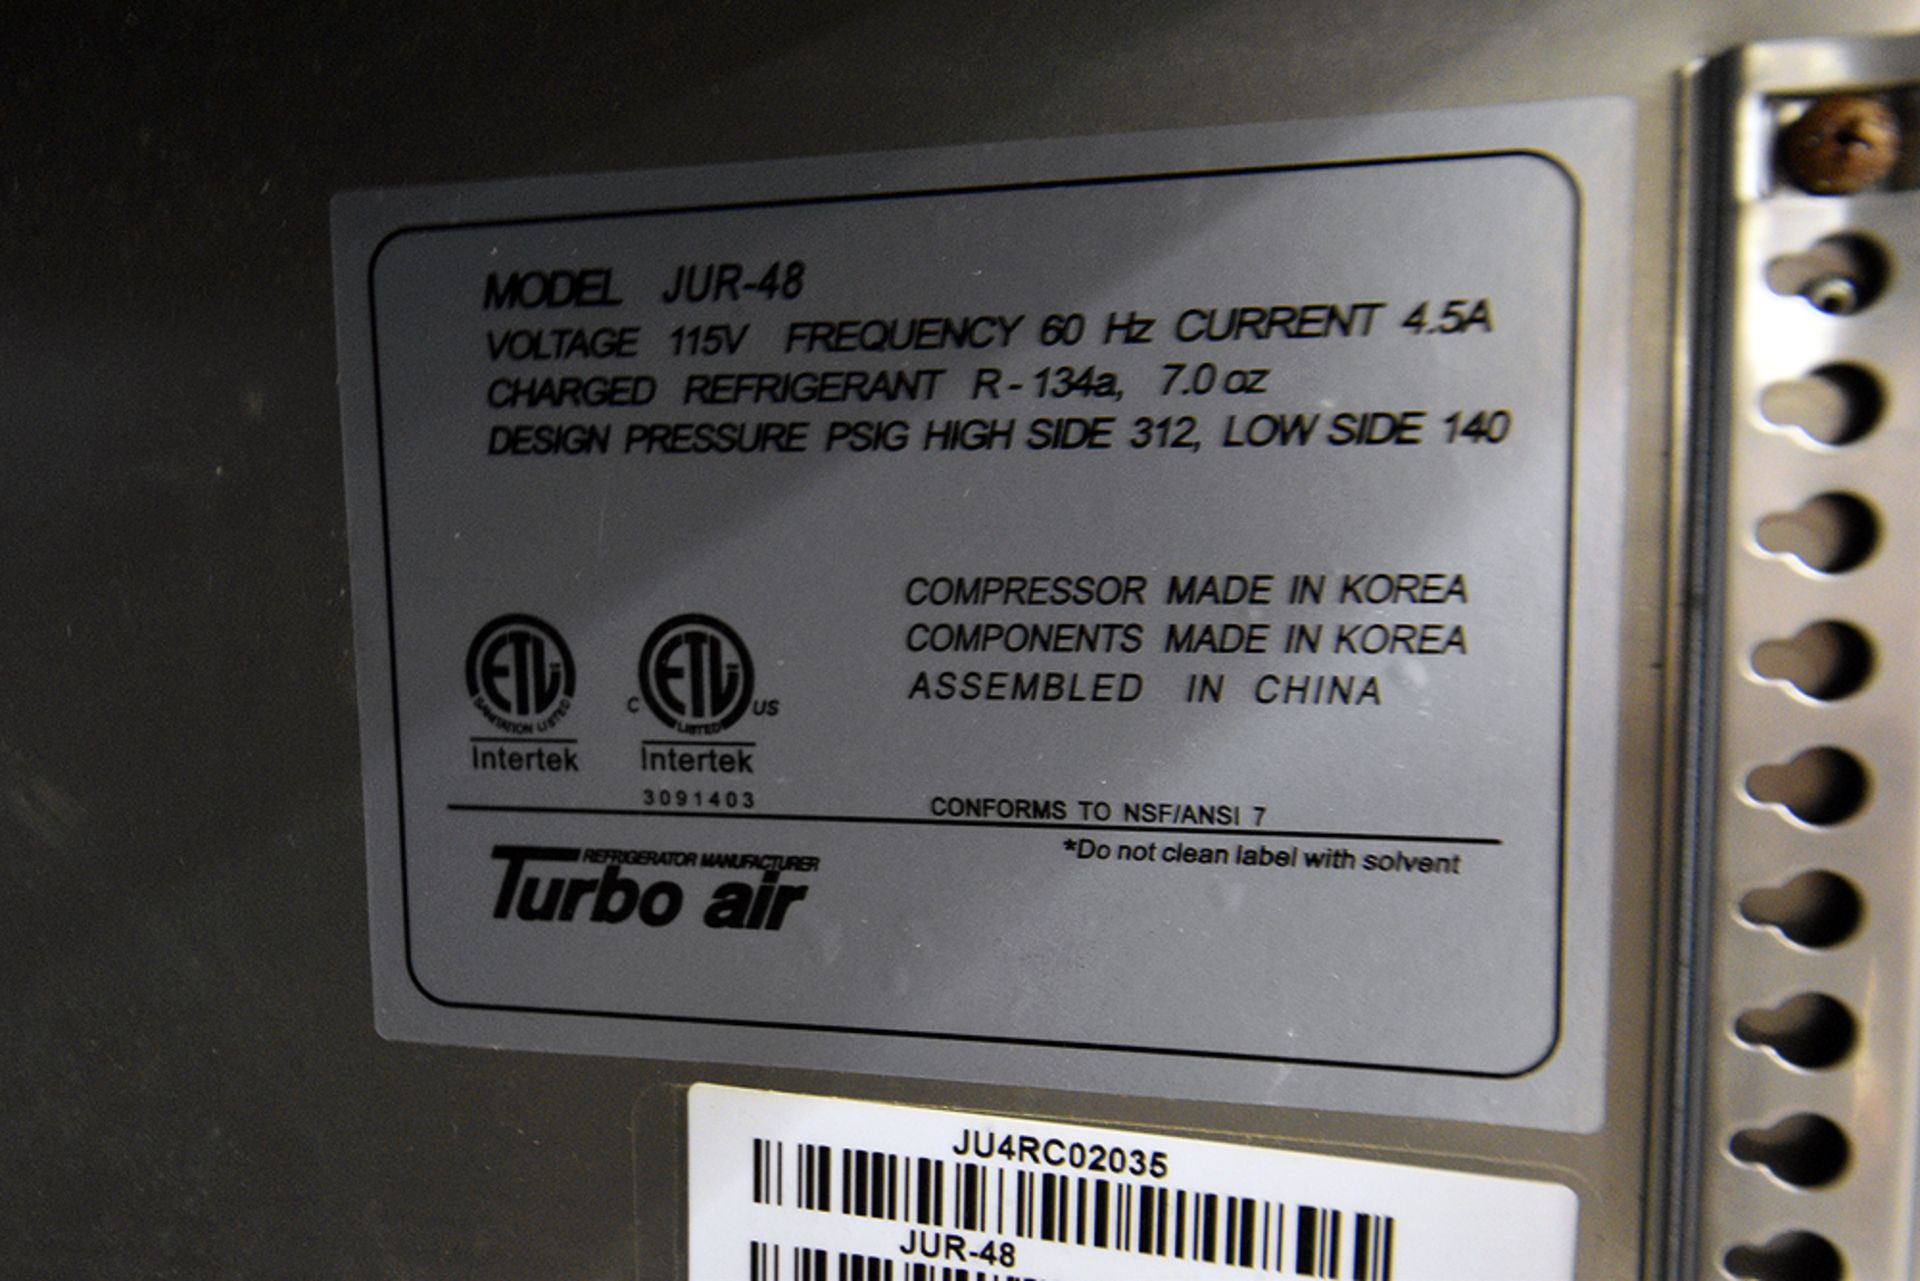 Turbo Air Model JUR-48 Refrigerated Cabinet - Image 7 of 8